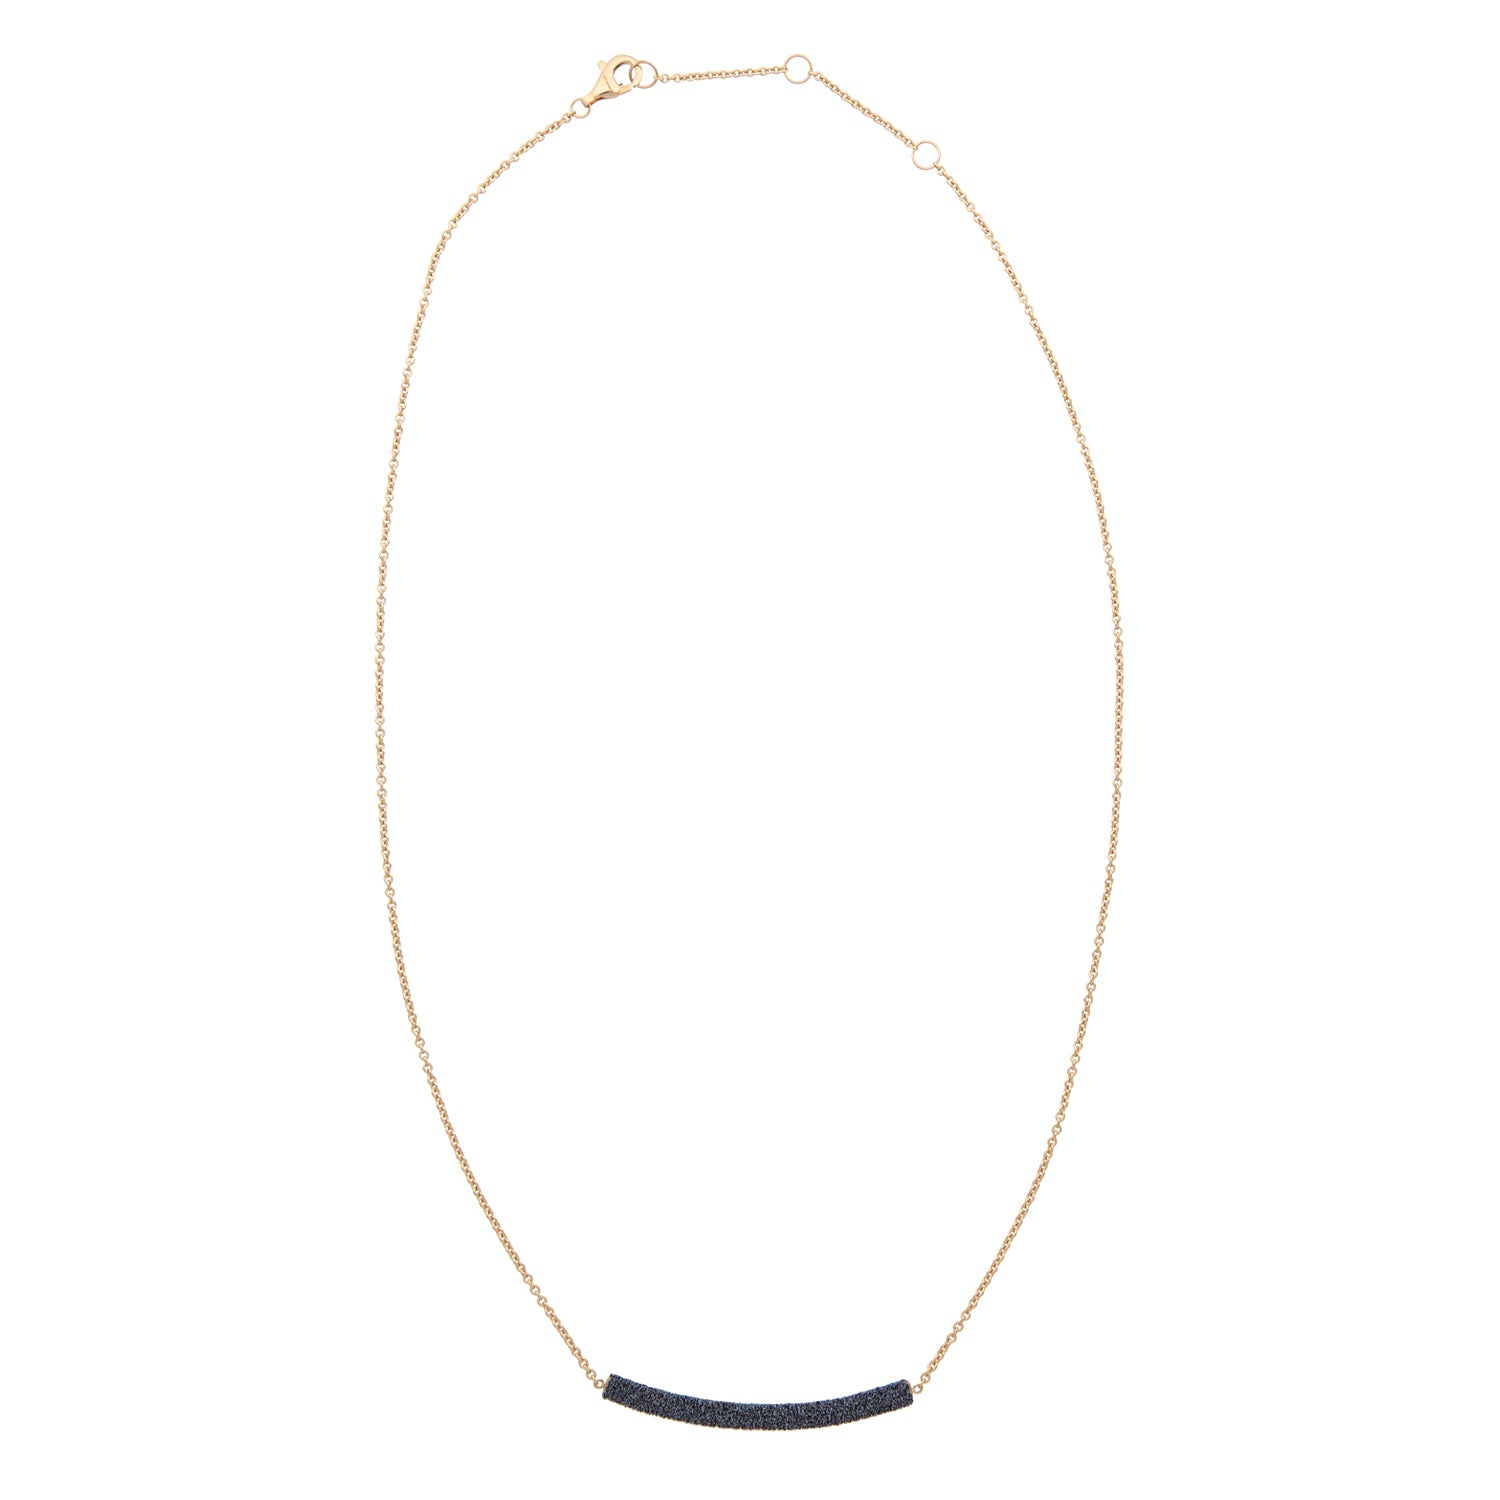 ROSE GOLD NECKLACE WITH Elongated ELEMENT